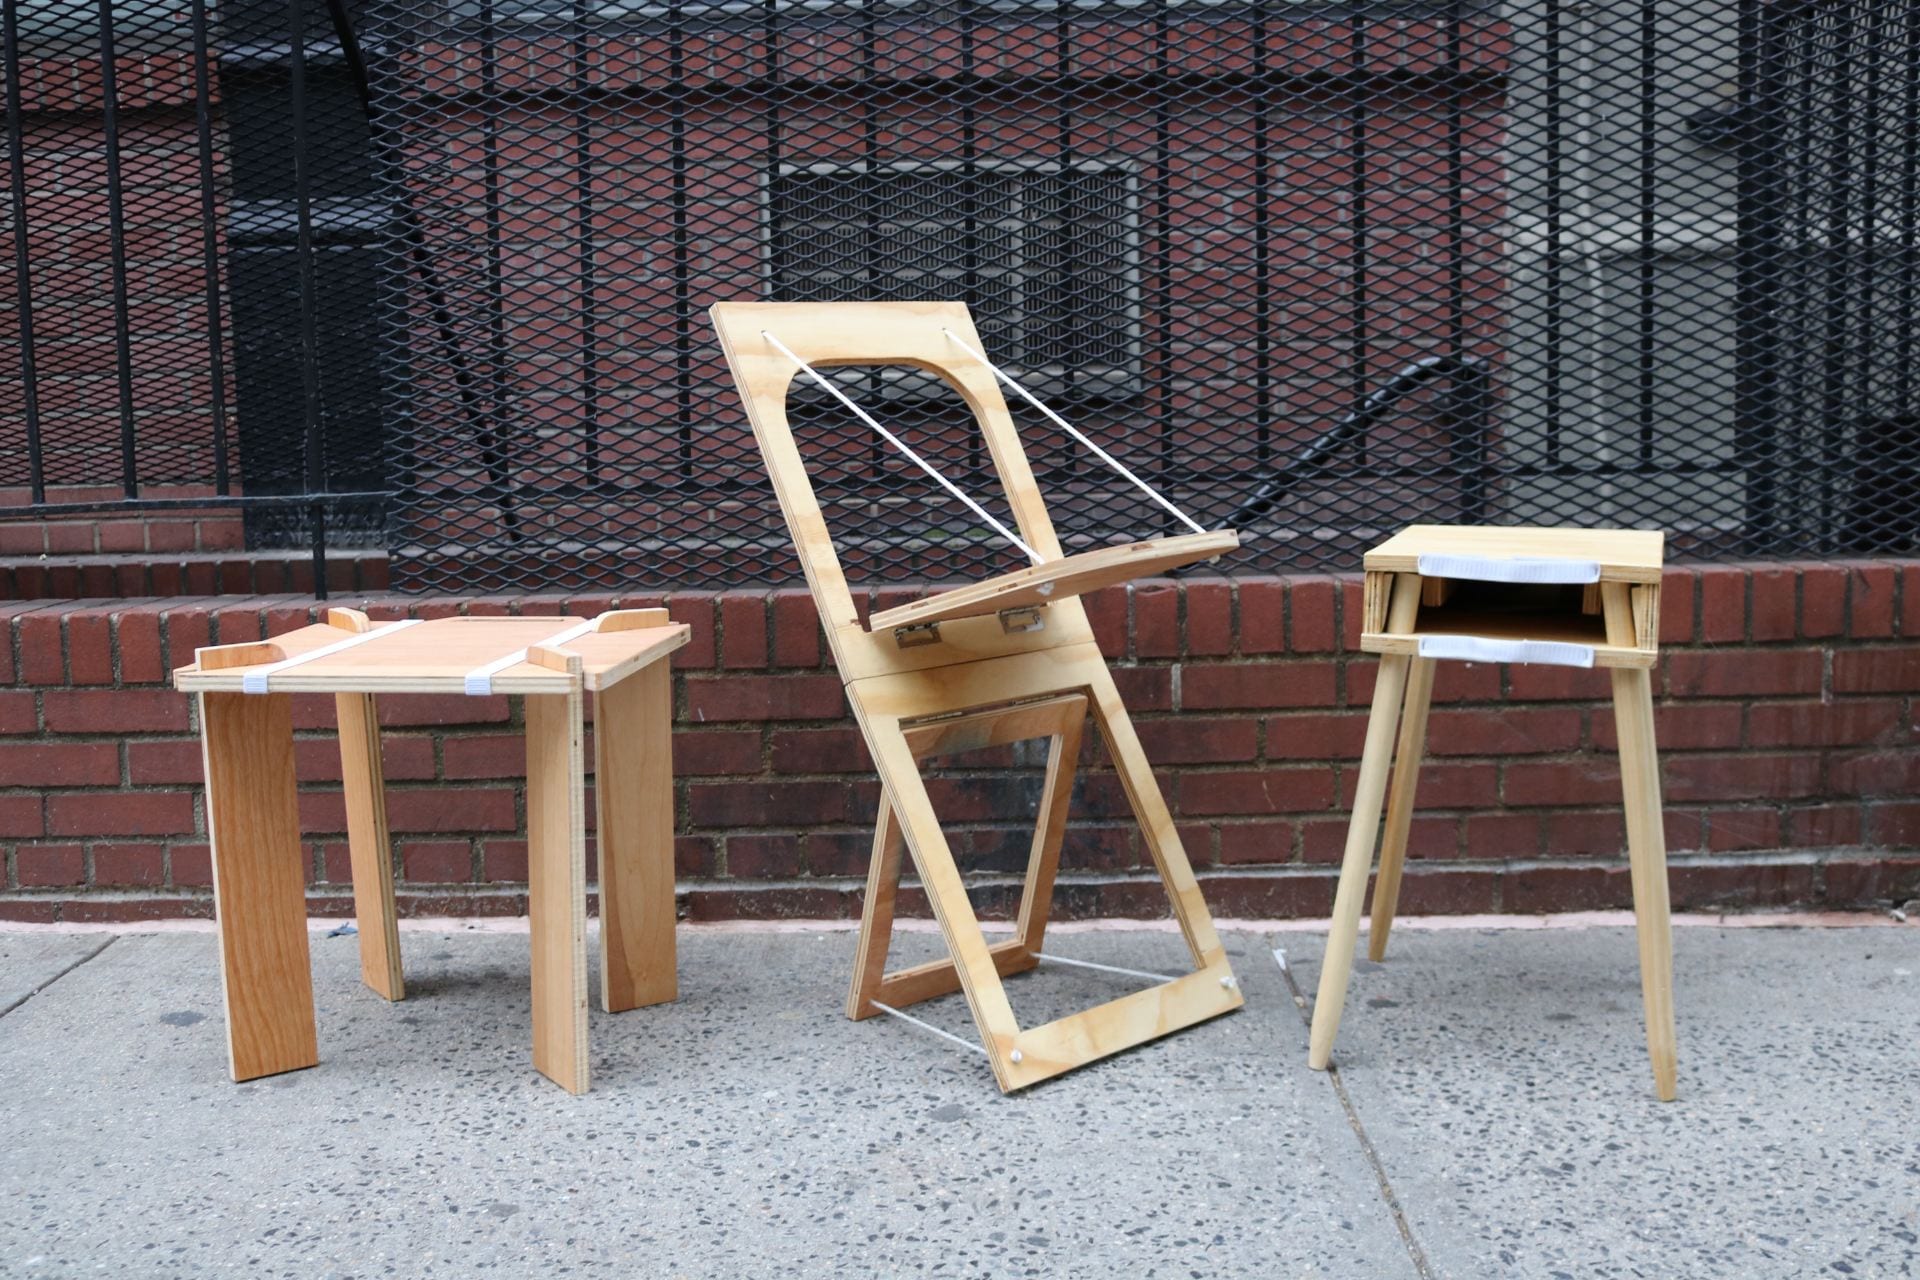 Space+Materiality: Project #3 – Chair